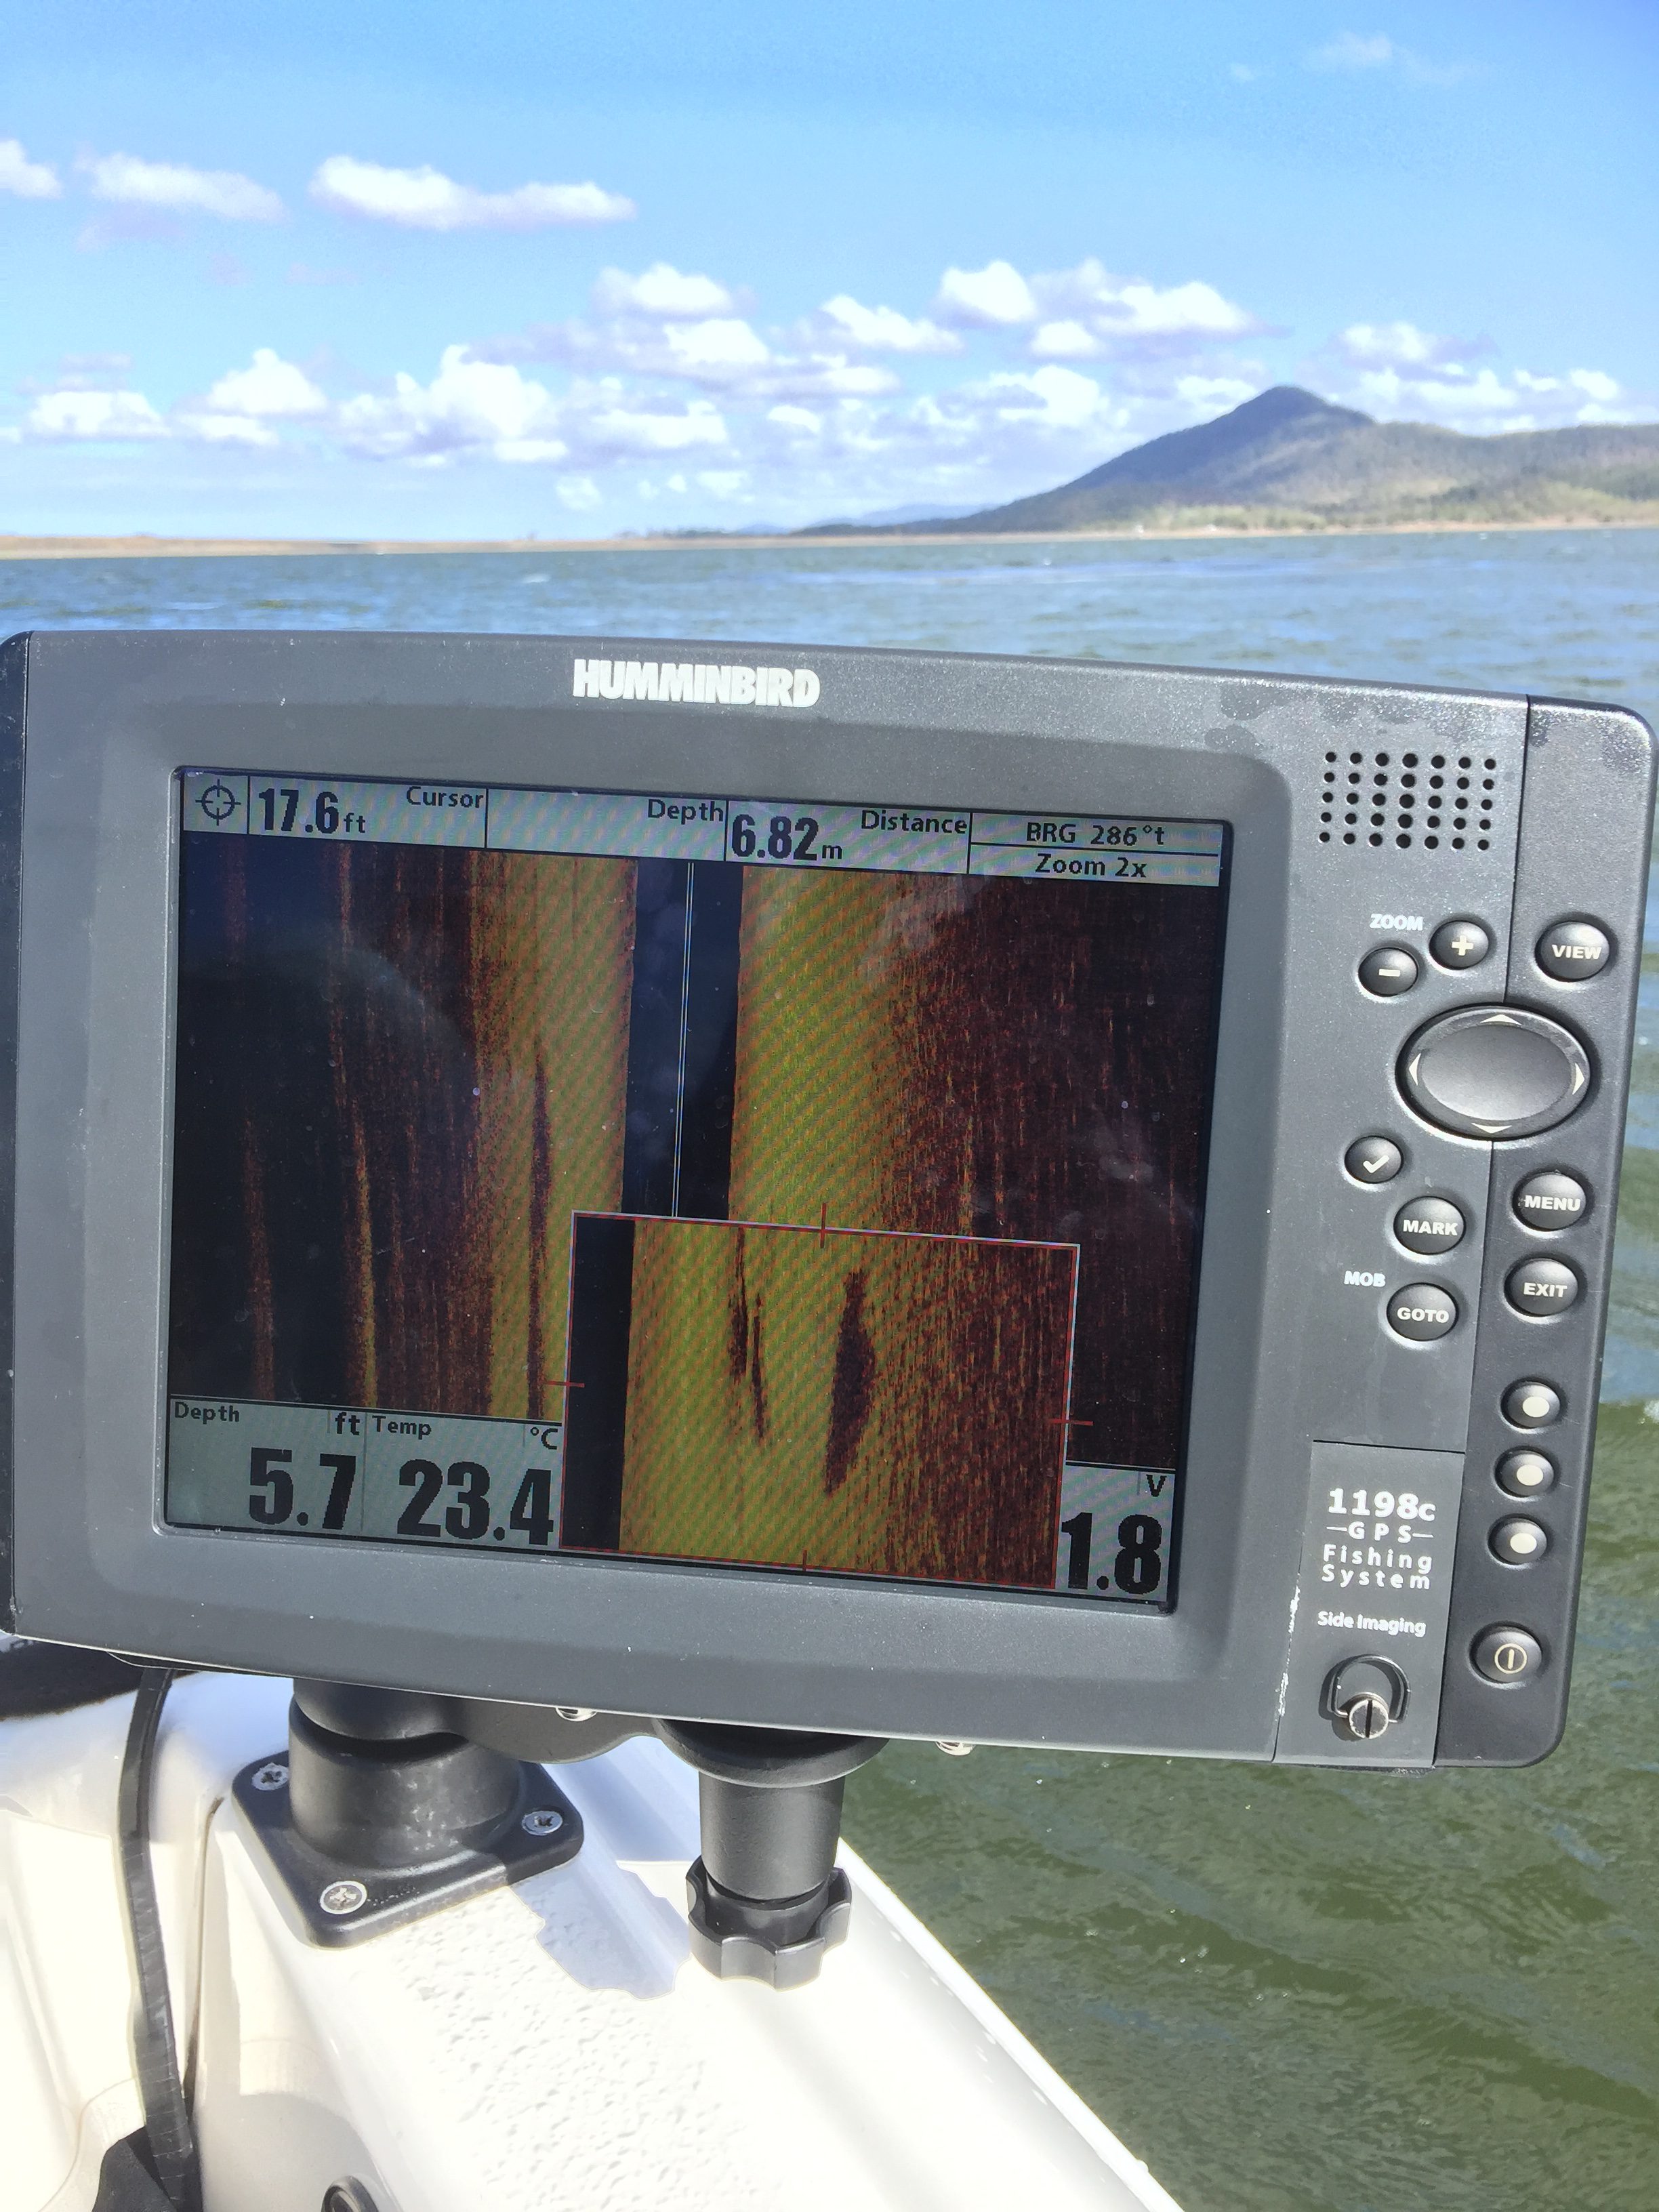 The Humminbird 1198 SI sounder showed barra coming through to the right of the boat.